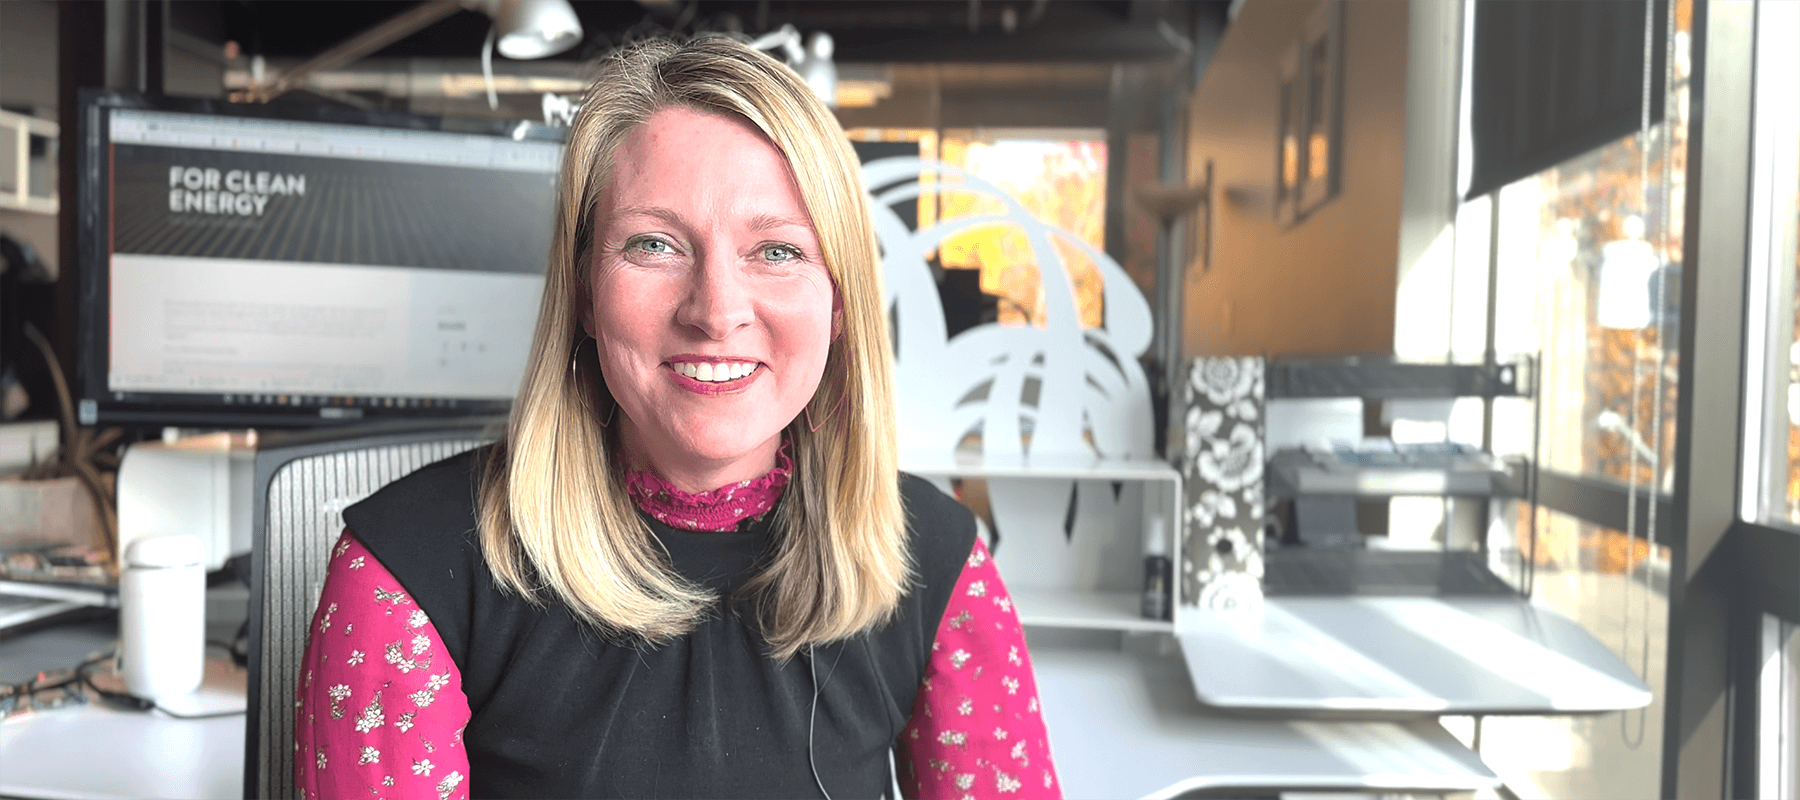 Amy Cunningham, new Managing Director of Sustainable Living at Kiterocket